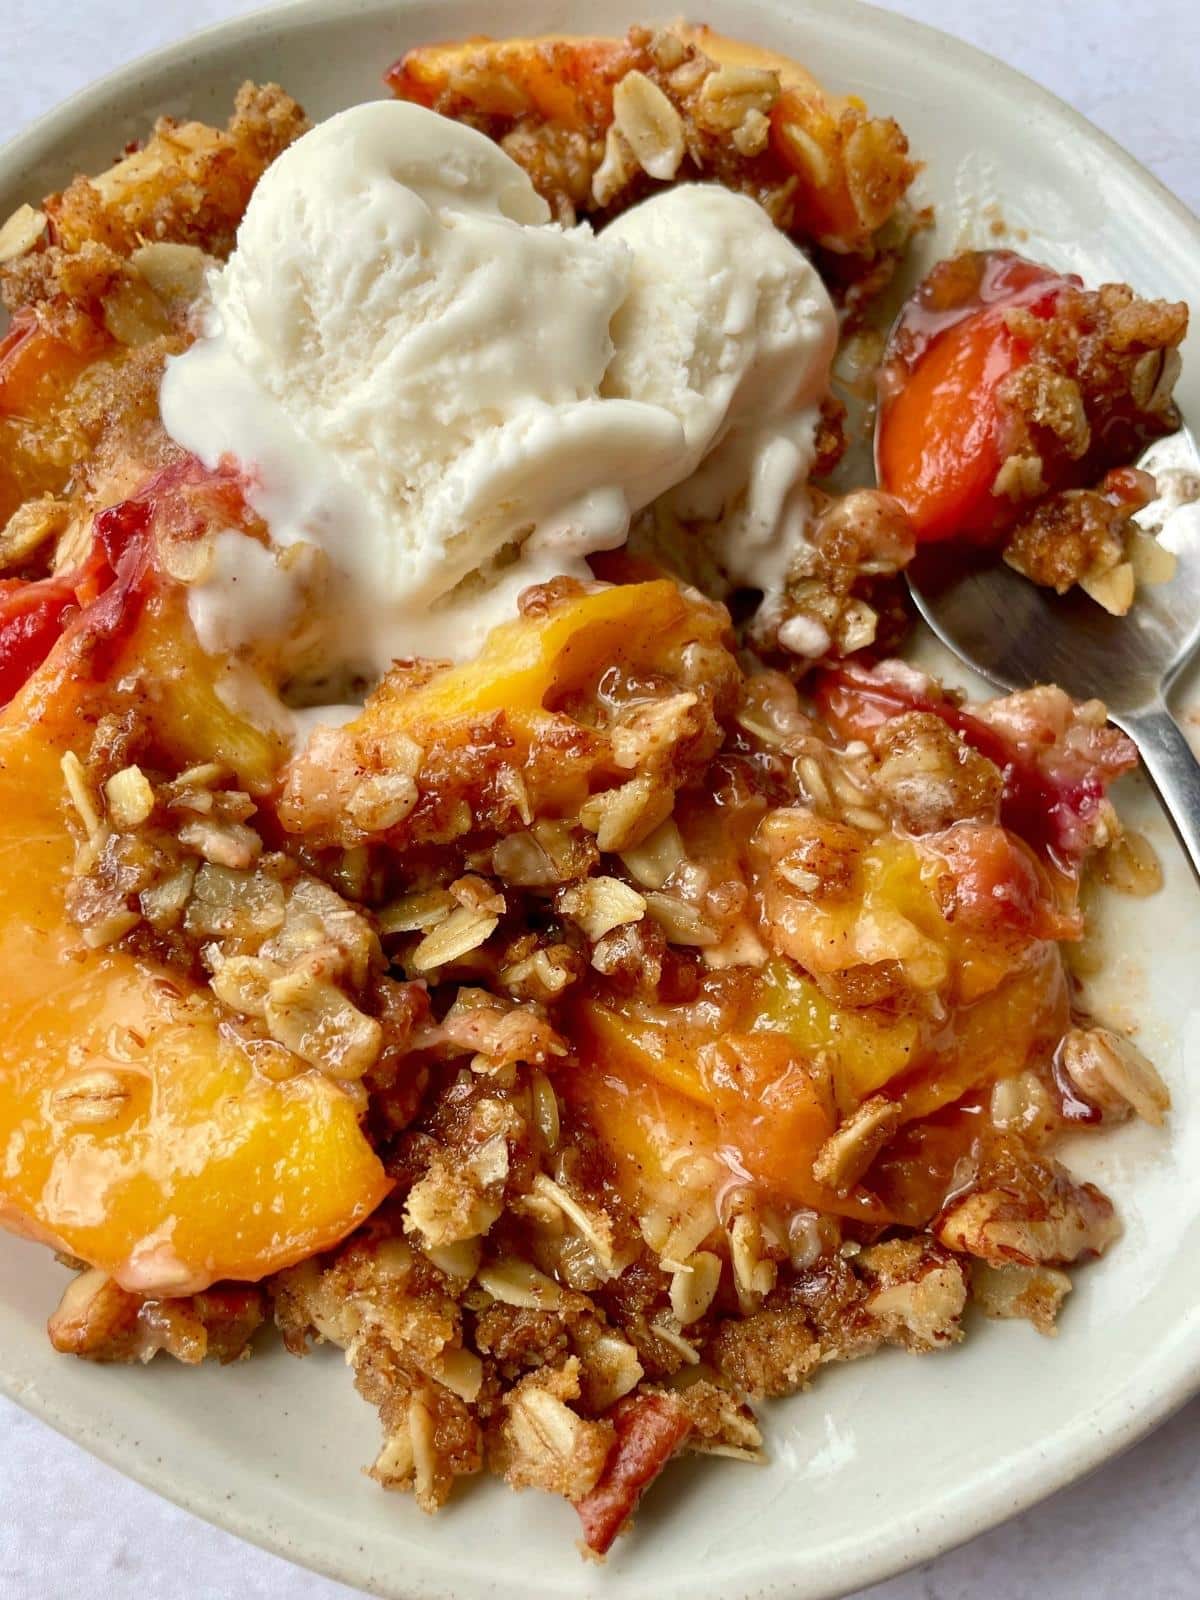 Eating peach crisp topped with ice cream.